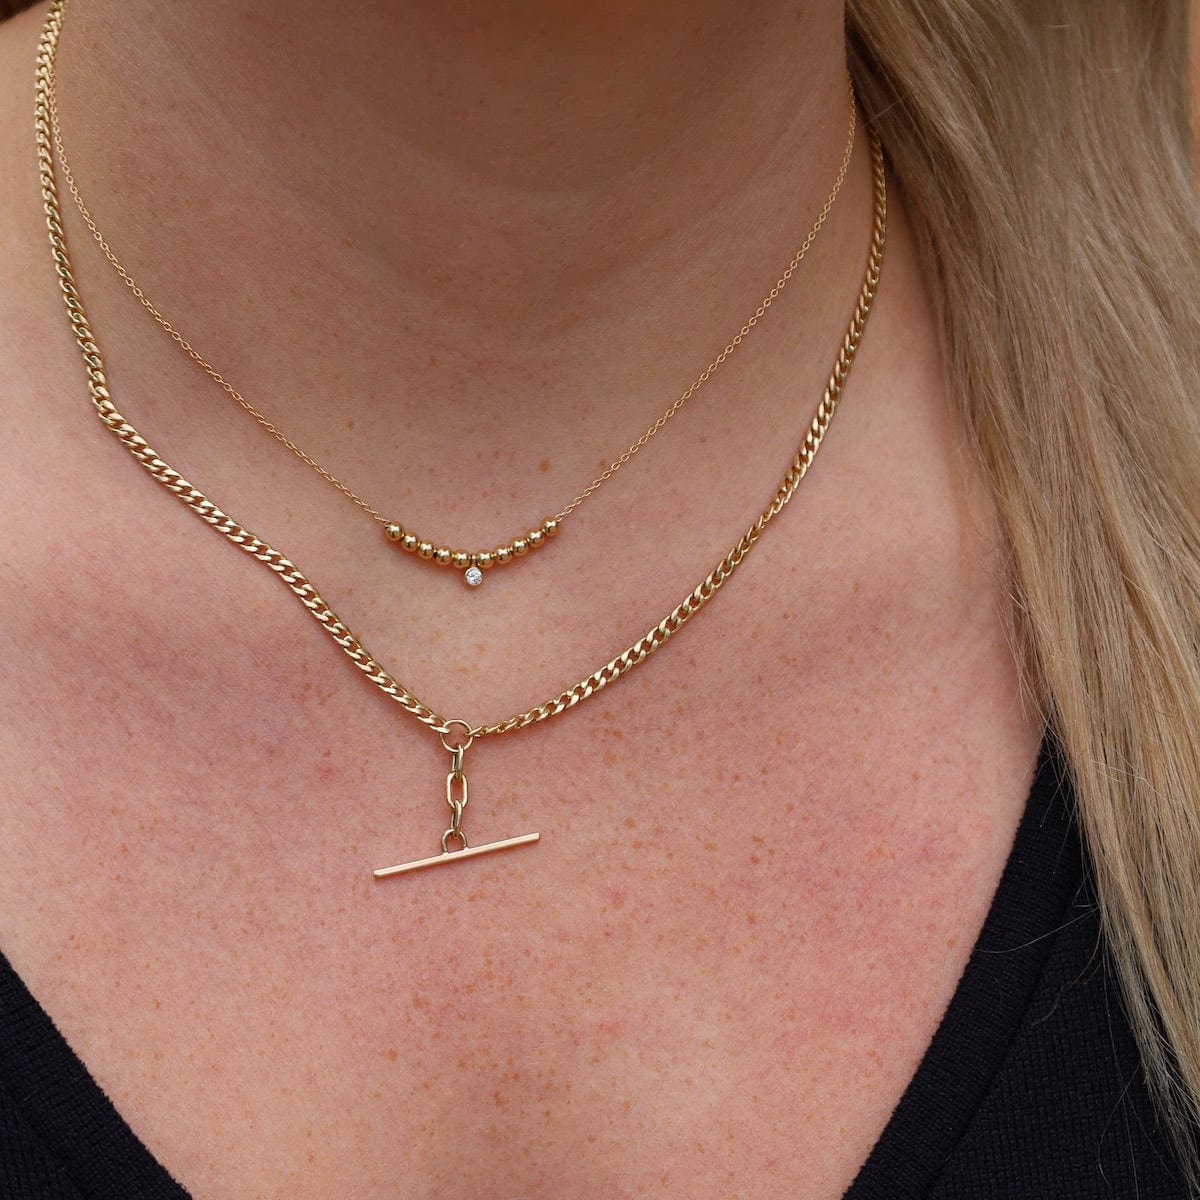 NKL-14K 14k Gold Mixed Small Curb Chain Faux Toggle Lariat